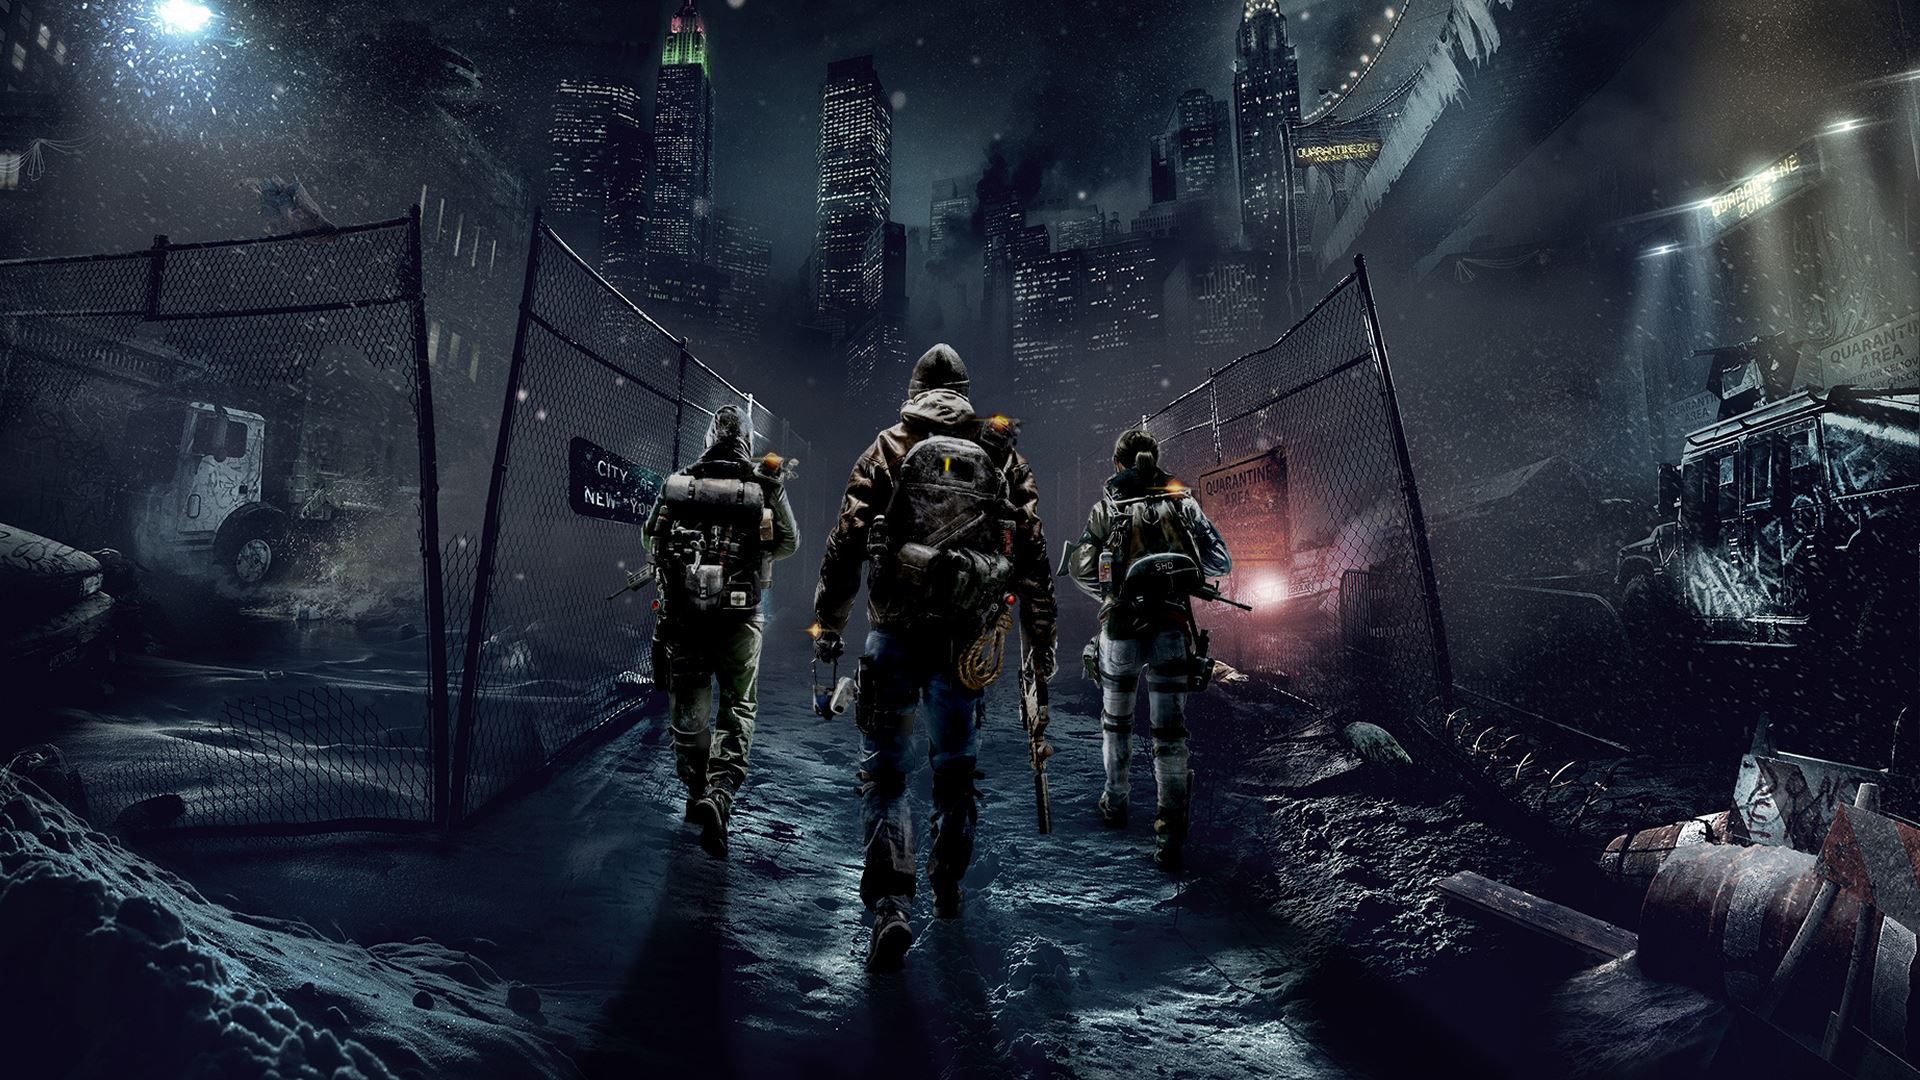 The Division Wallpapers Pictures Images Afalchi Free images wallpape [afalchi.blogspot.com]